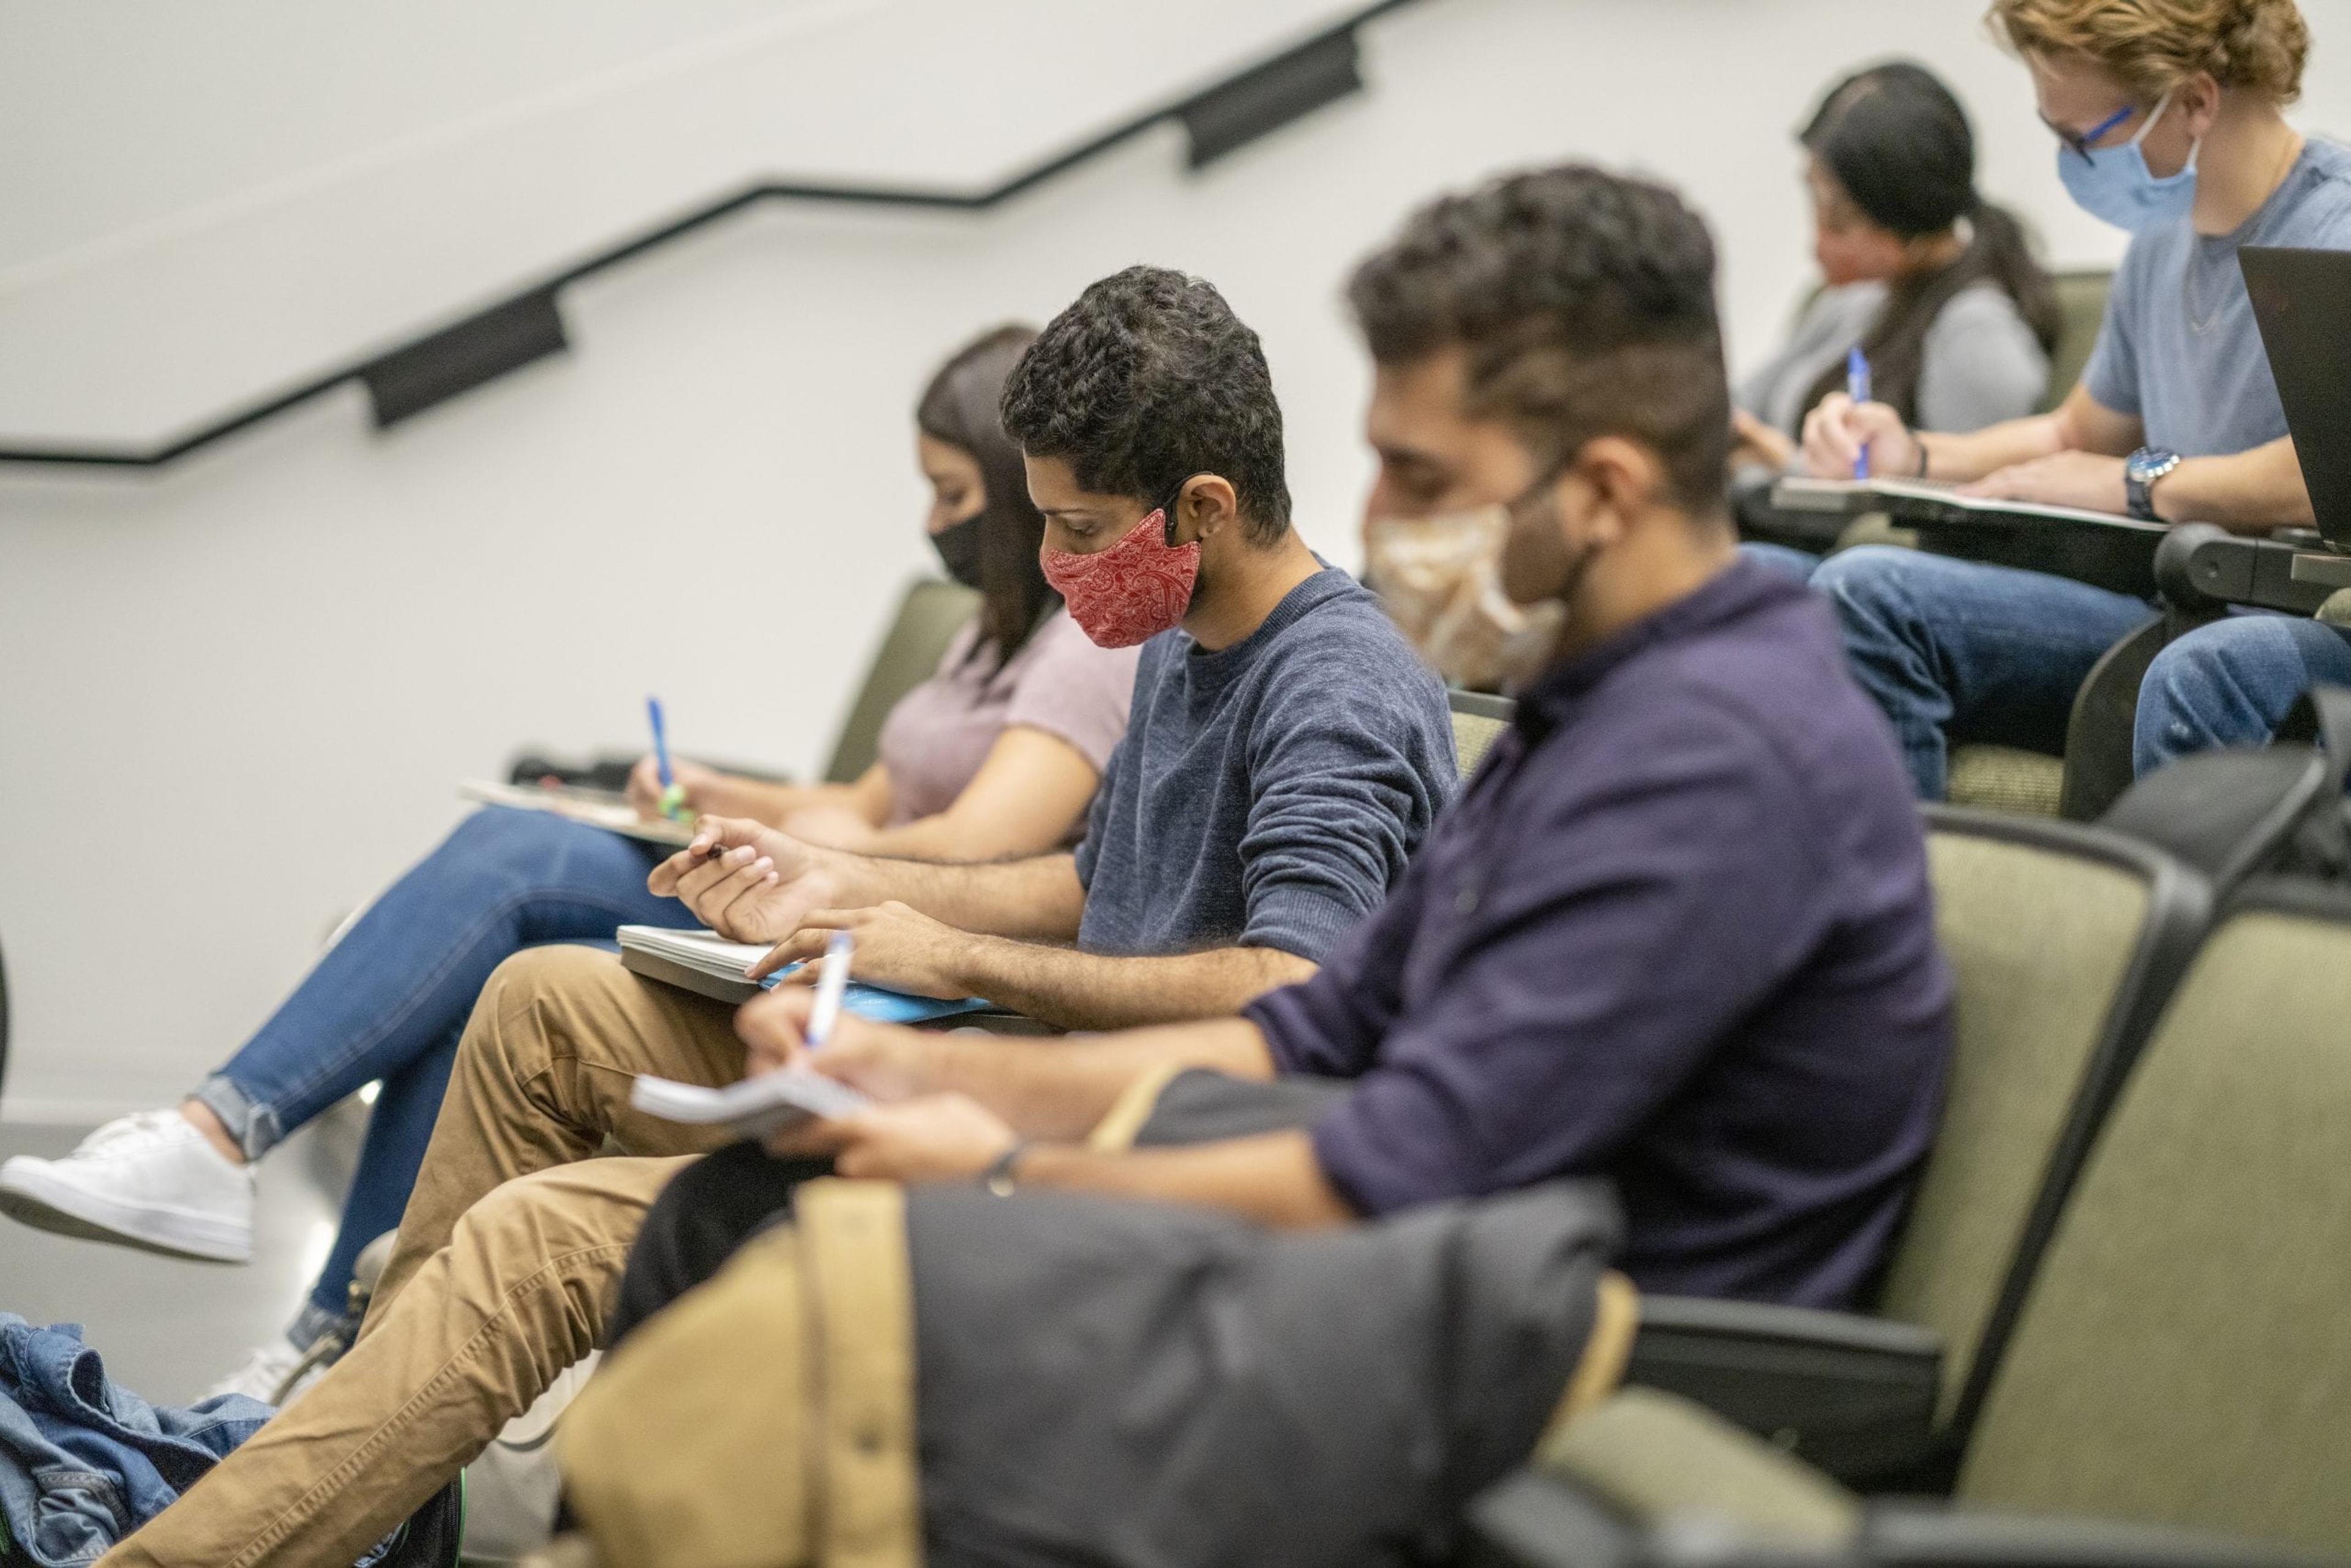 College students wearing masks in a classroom